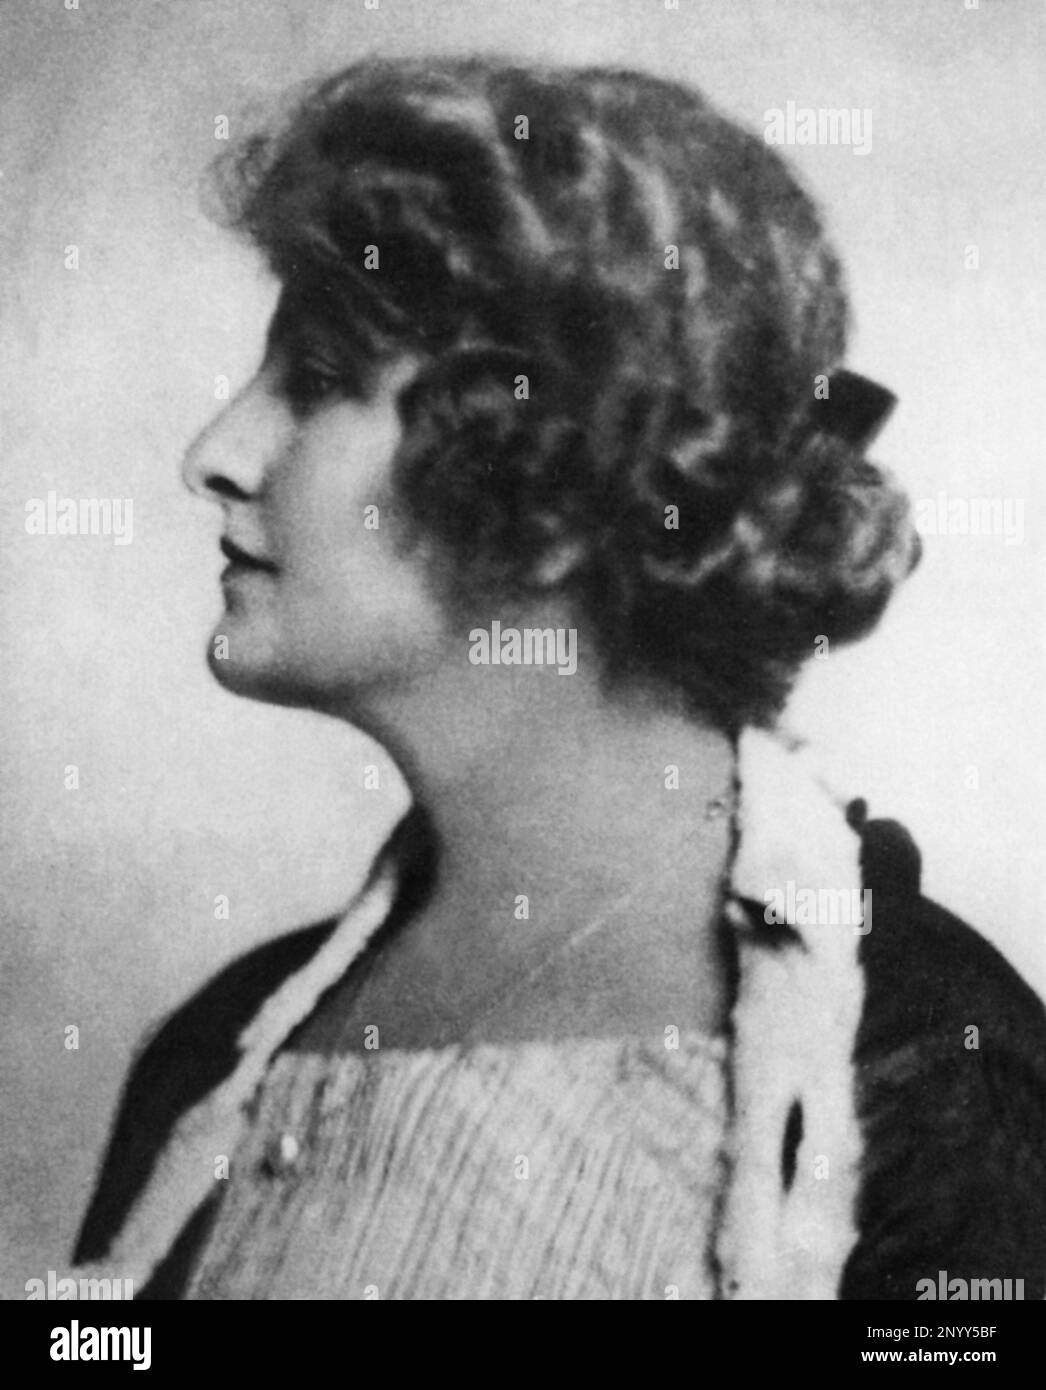 The austrian artist ALMA MAHLER Gropius Werfel ( 1879 - 1964 ), married to celebrated music composer Gustav Mahler in 1902 , to 1915 married the german Bauhaus artist architect Walter Gropius , from 1929 married with writer Franz Werfel . From 1912 was the lover of expressionist painter Oskar Kokoschka . Already was a secret lover of Secession painter Gustav Klimt . Alma was the daughter of prominent Viennese landscape painter Emil Jakob Schindler - portrait - ritratto - profilo - profile - MUSA - MUSE - amante   ----  Archivio GBB Stock Photo